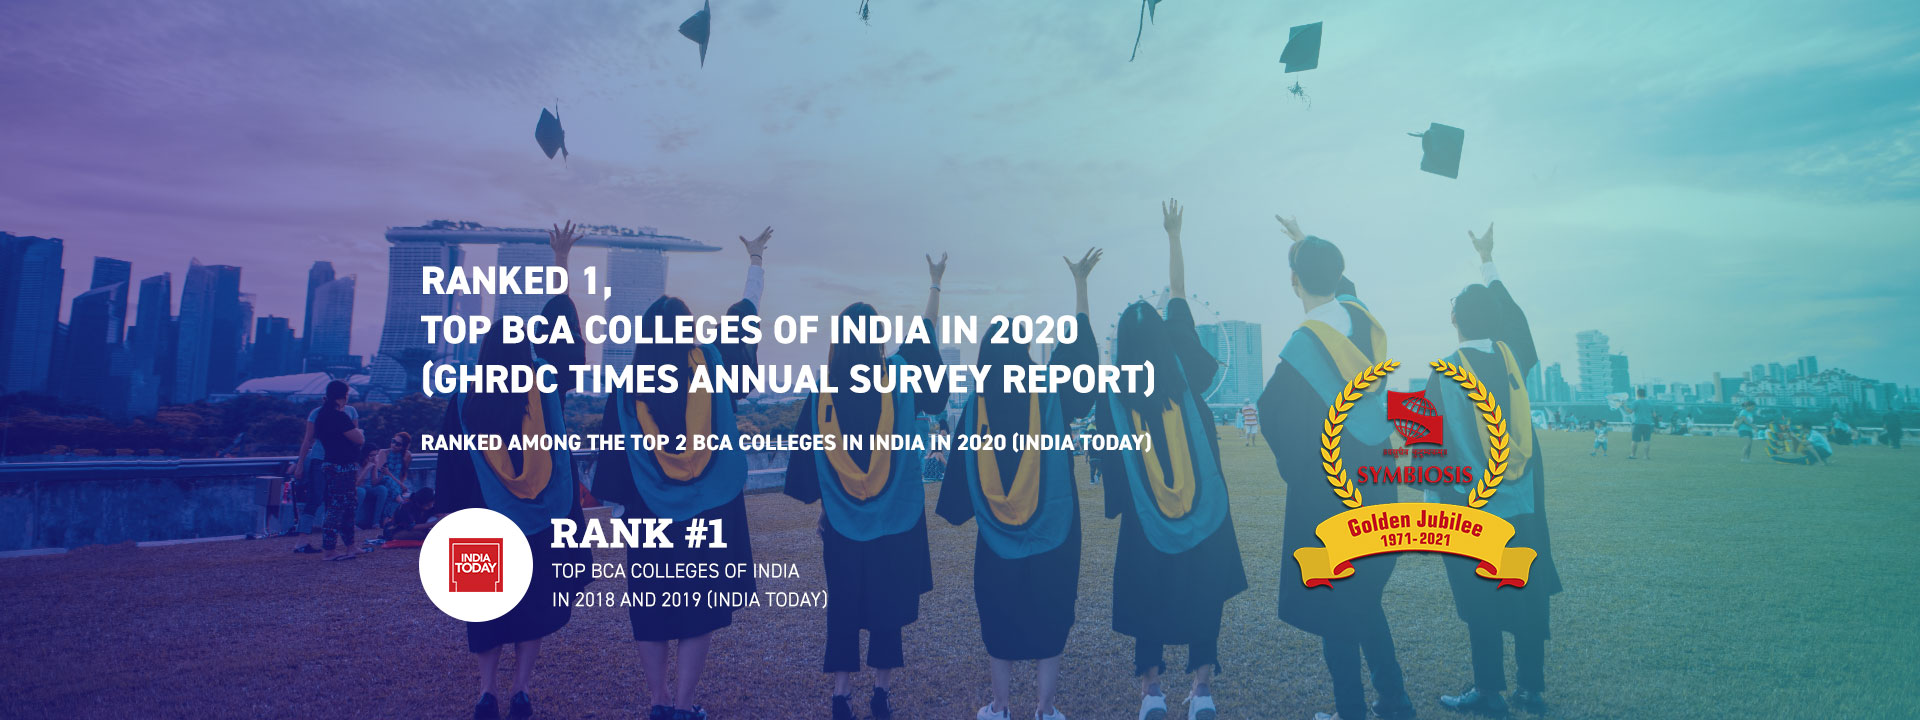 Top BCA Colleges of India in 2020